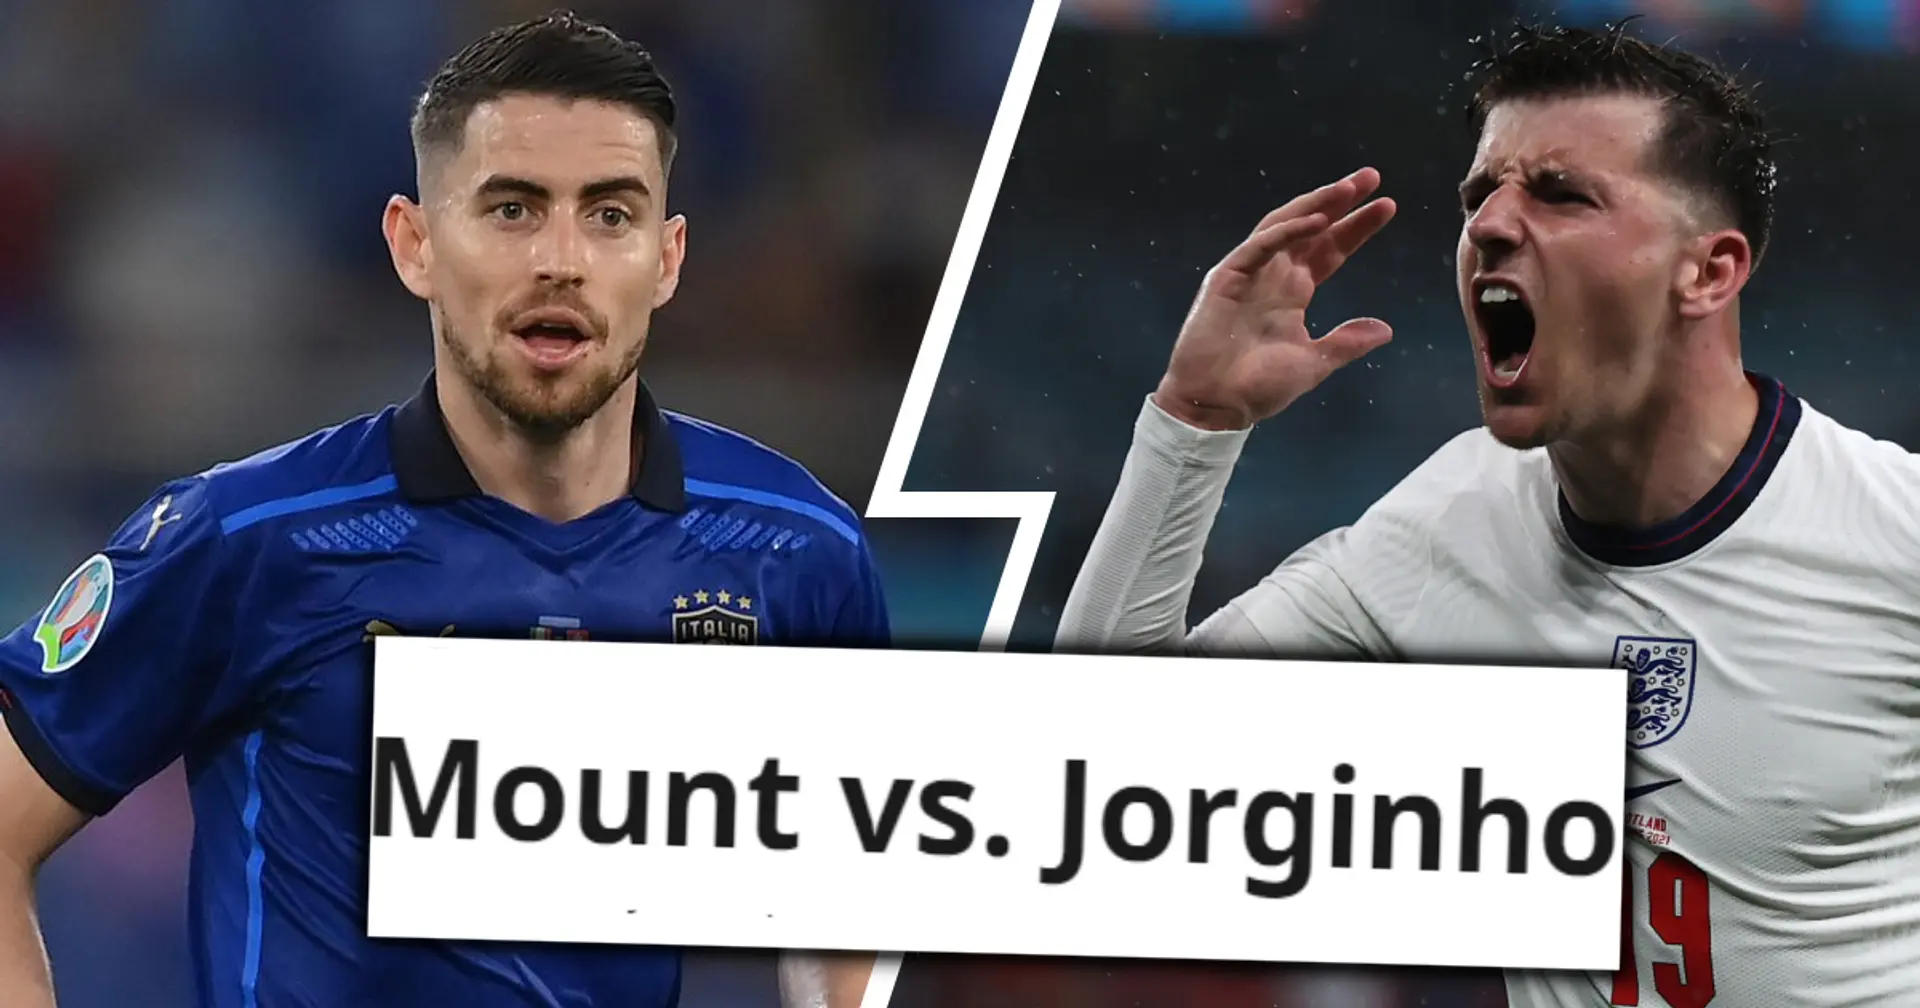 Mount vs Jorginho: CFC fan uses data to explain why Mason might have upper hand in crucial final clash